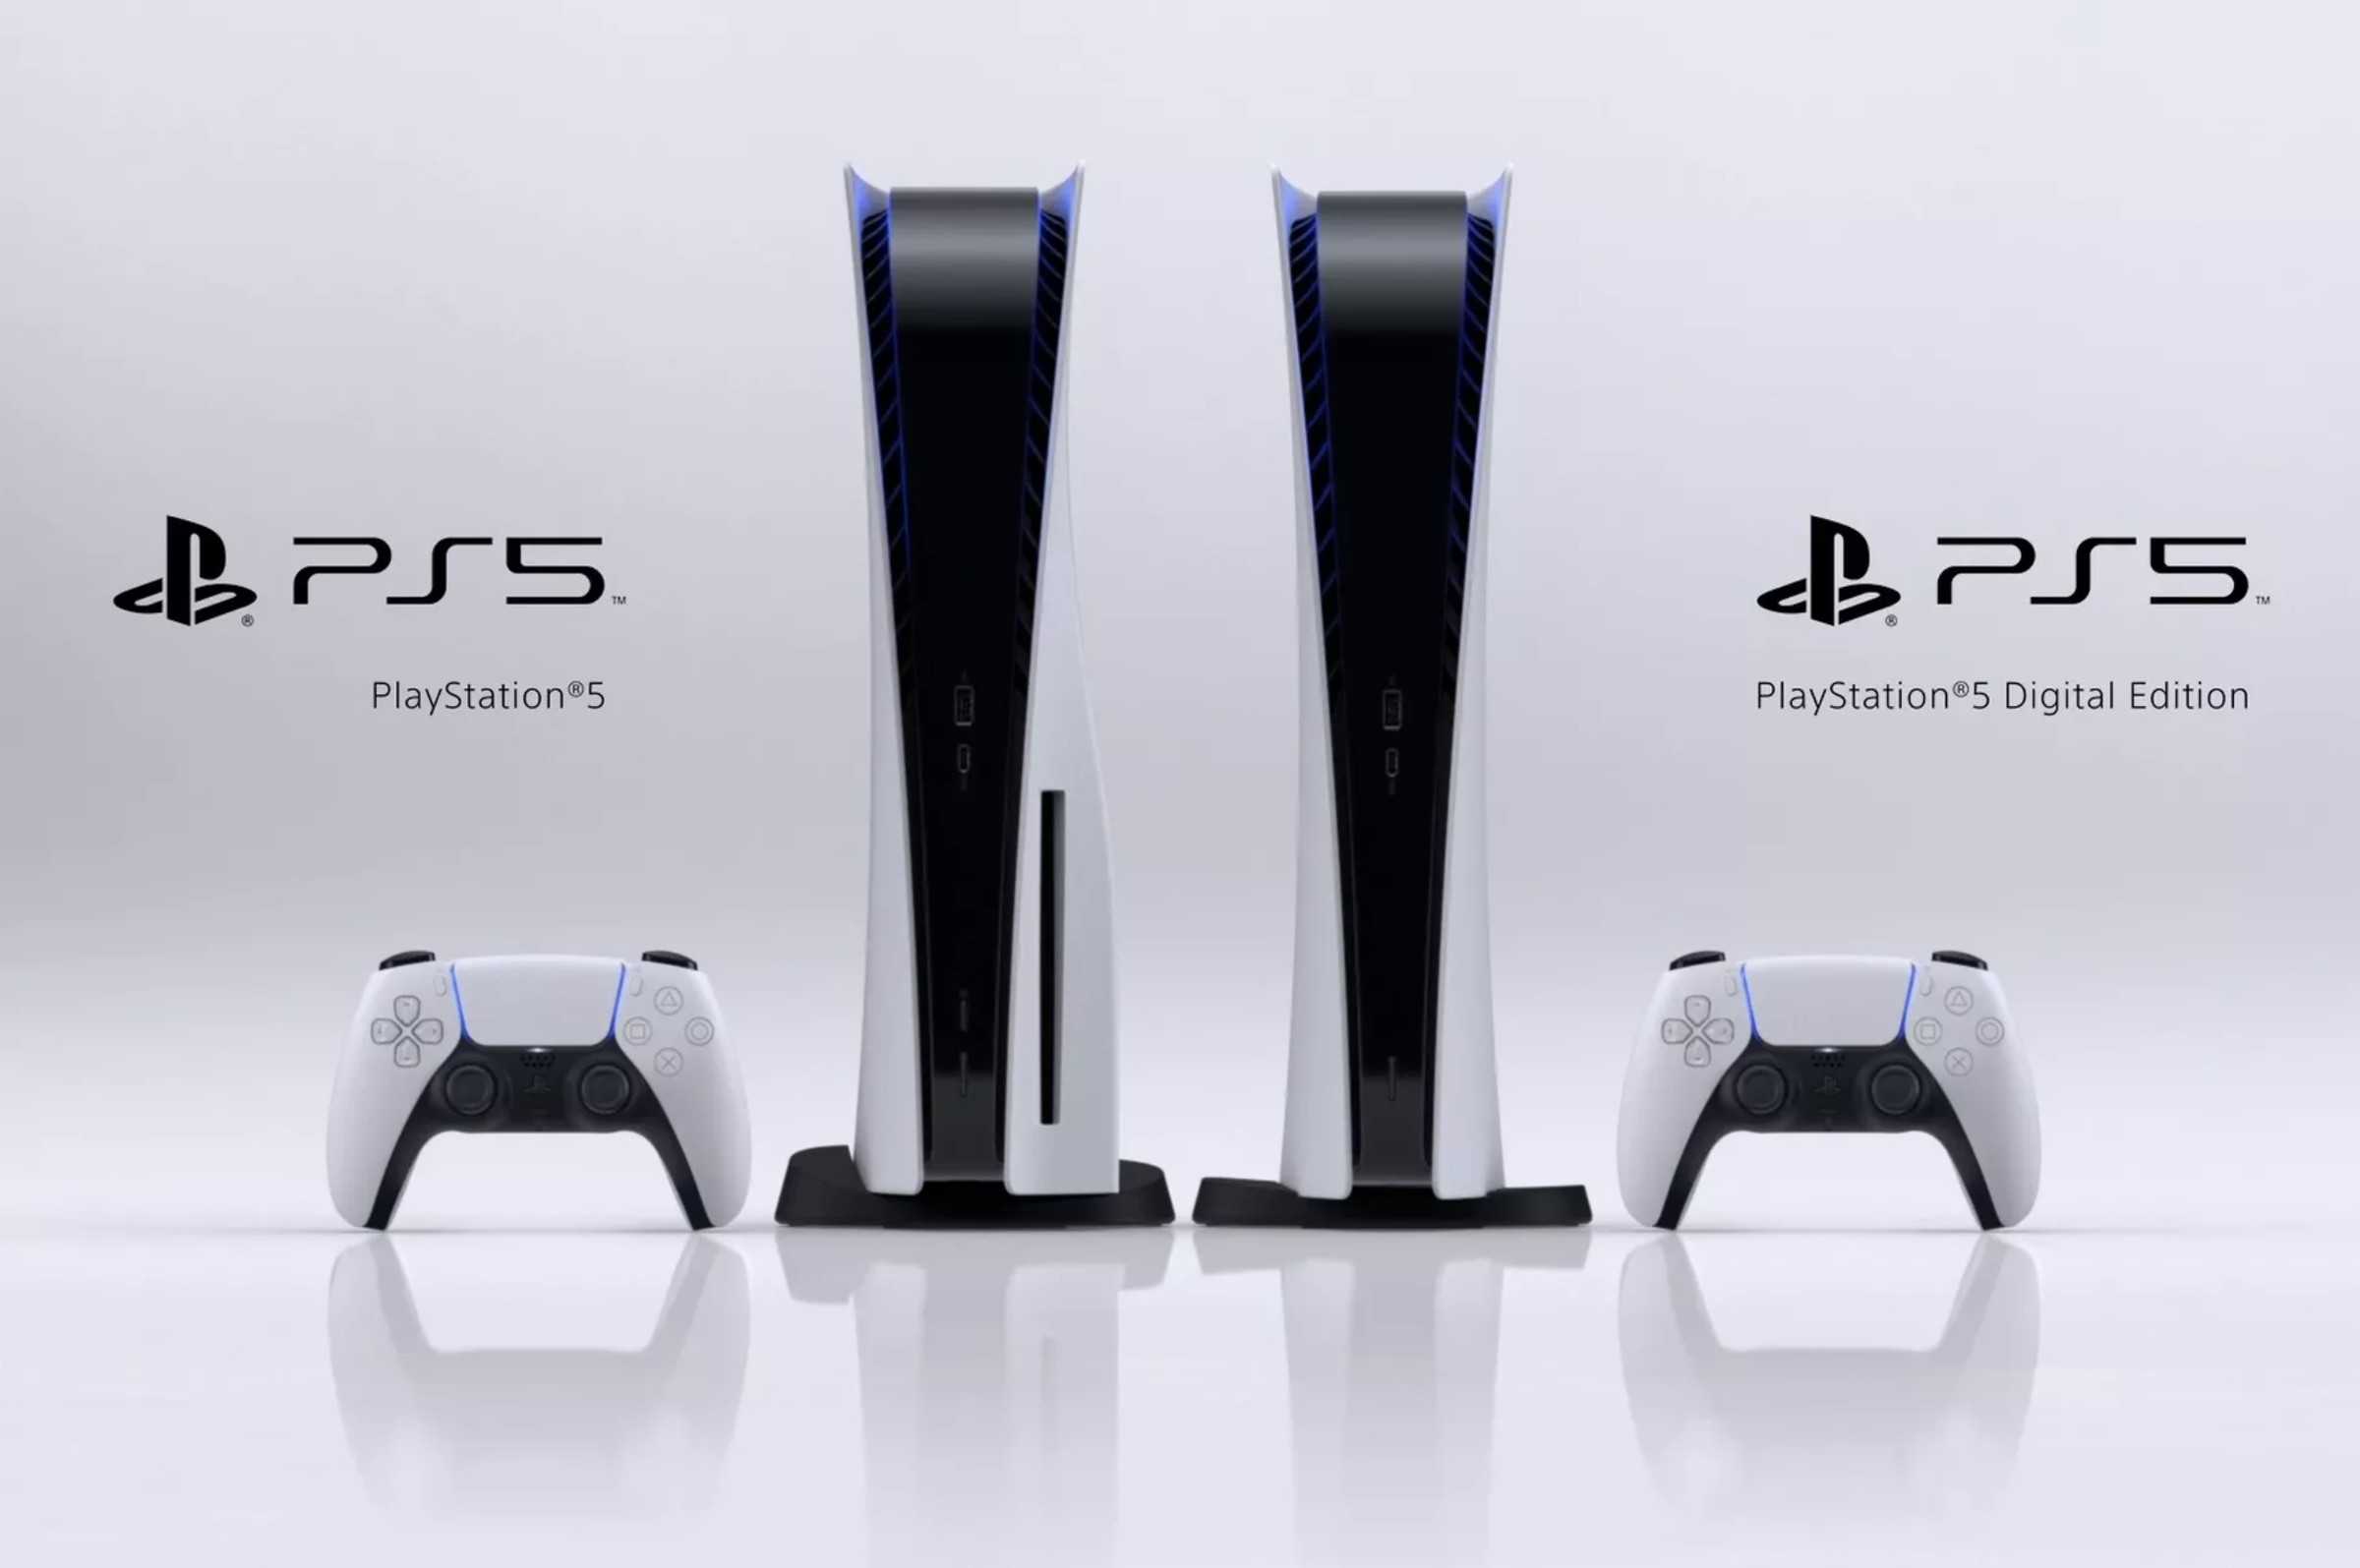 Sony’s PlayStation 5 consoles.